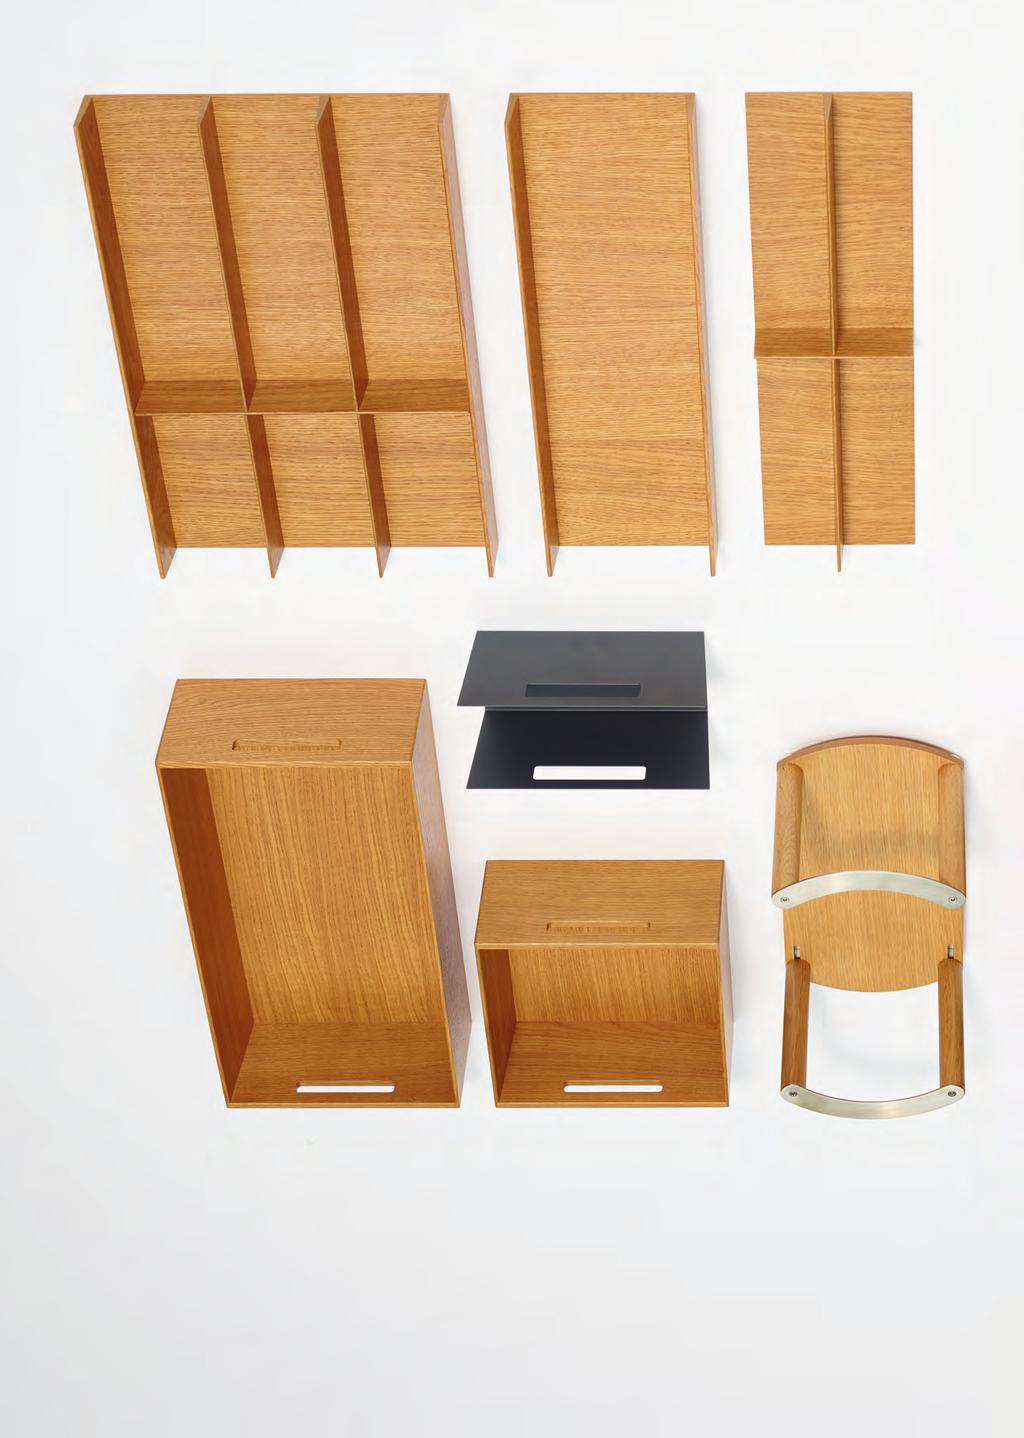 OUT - STANDINGLY VERSATILE Only 21 elements to create a huge range of organizer systems for